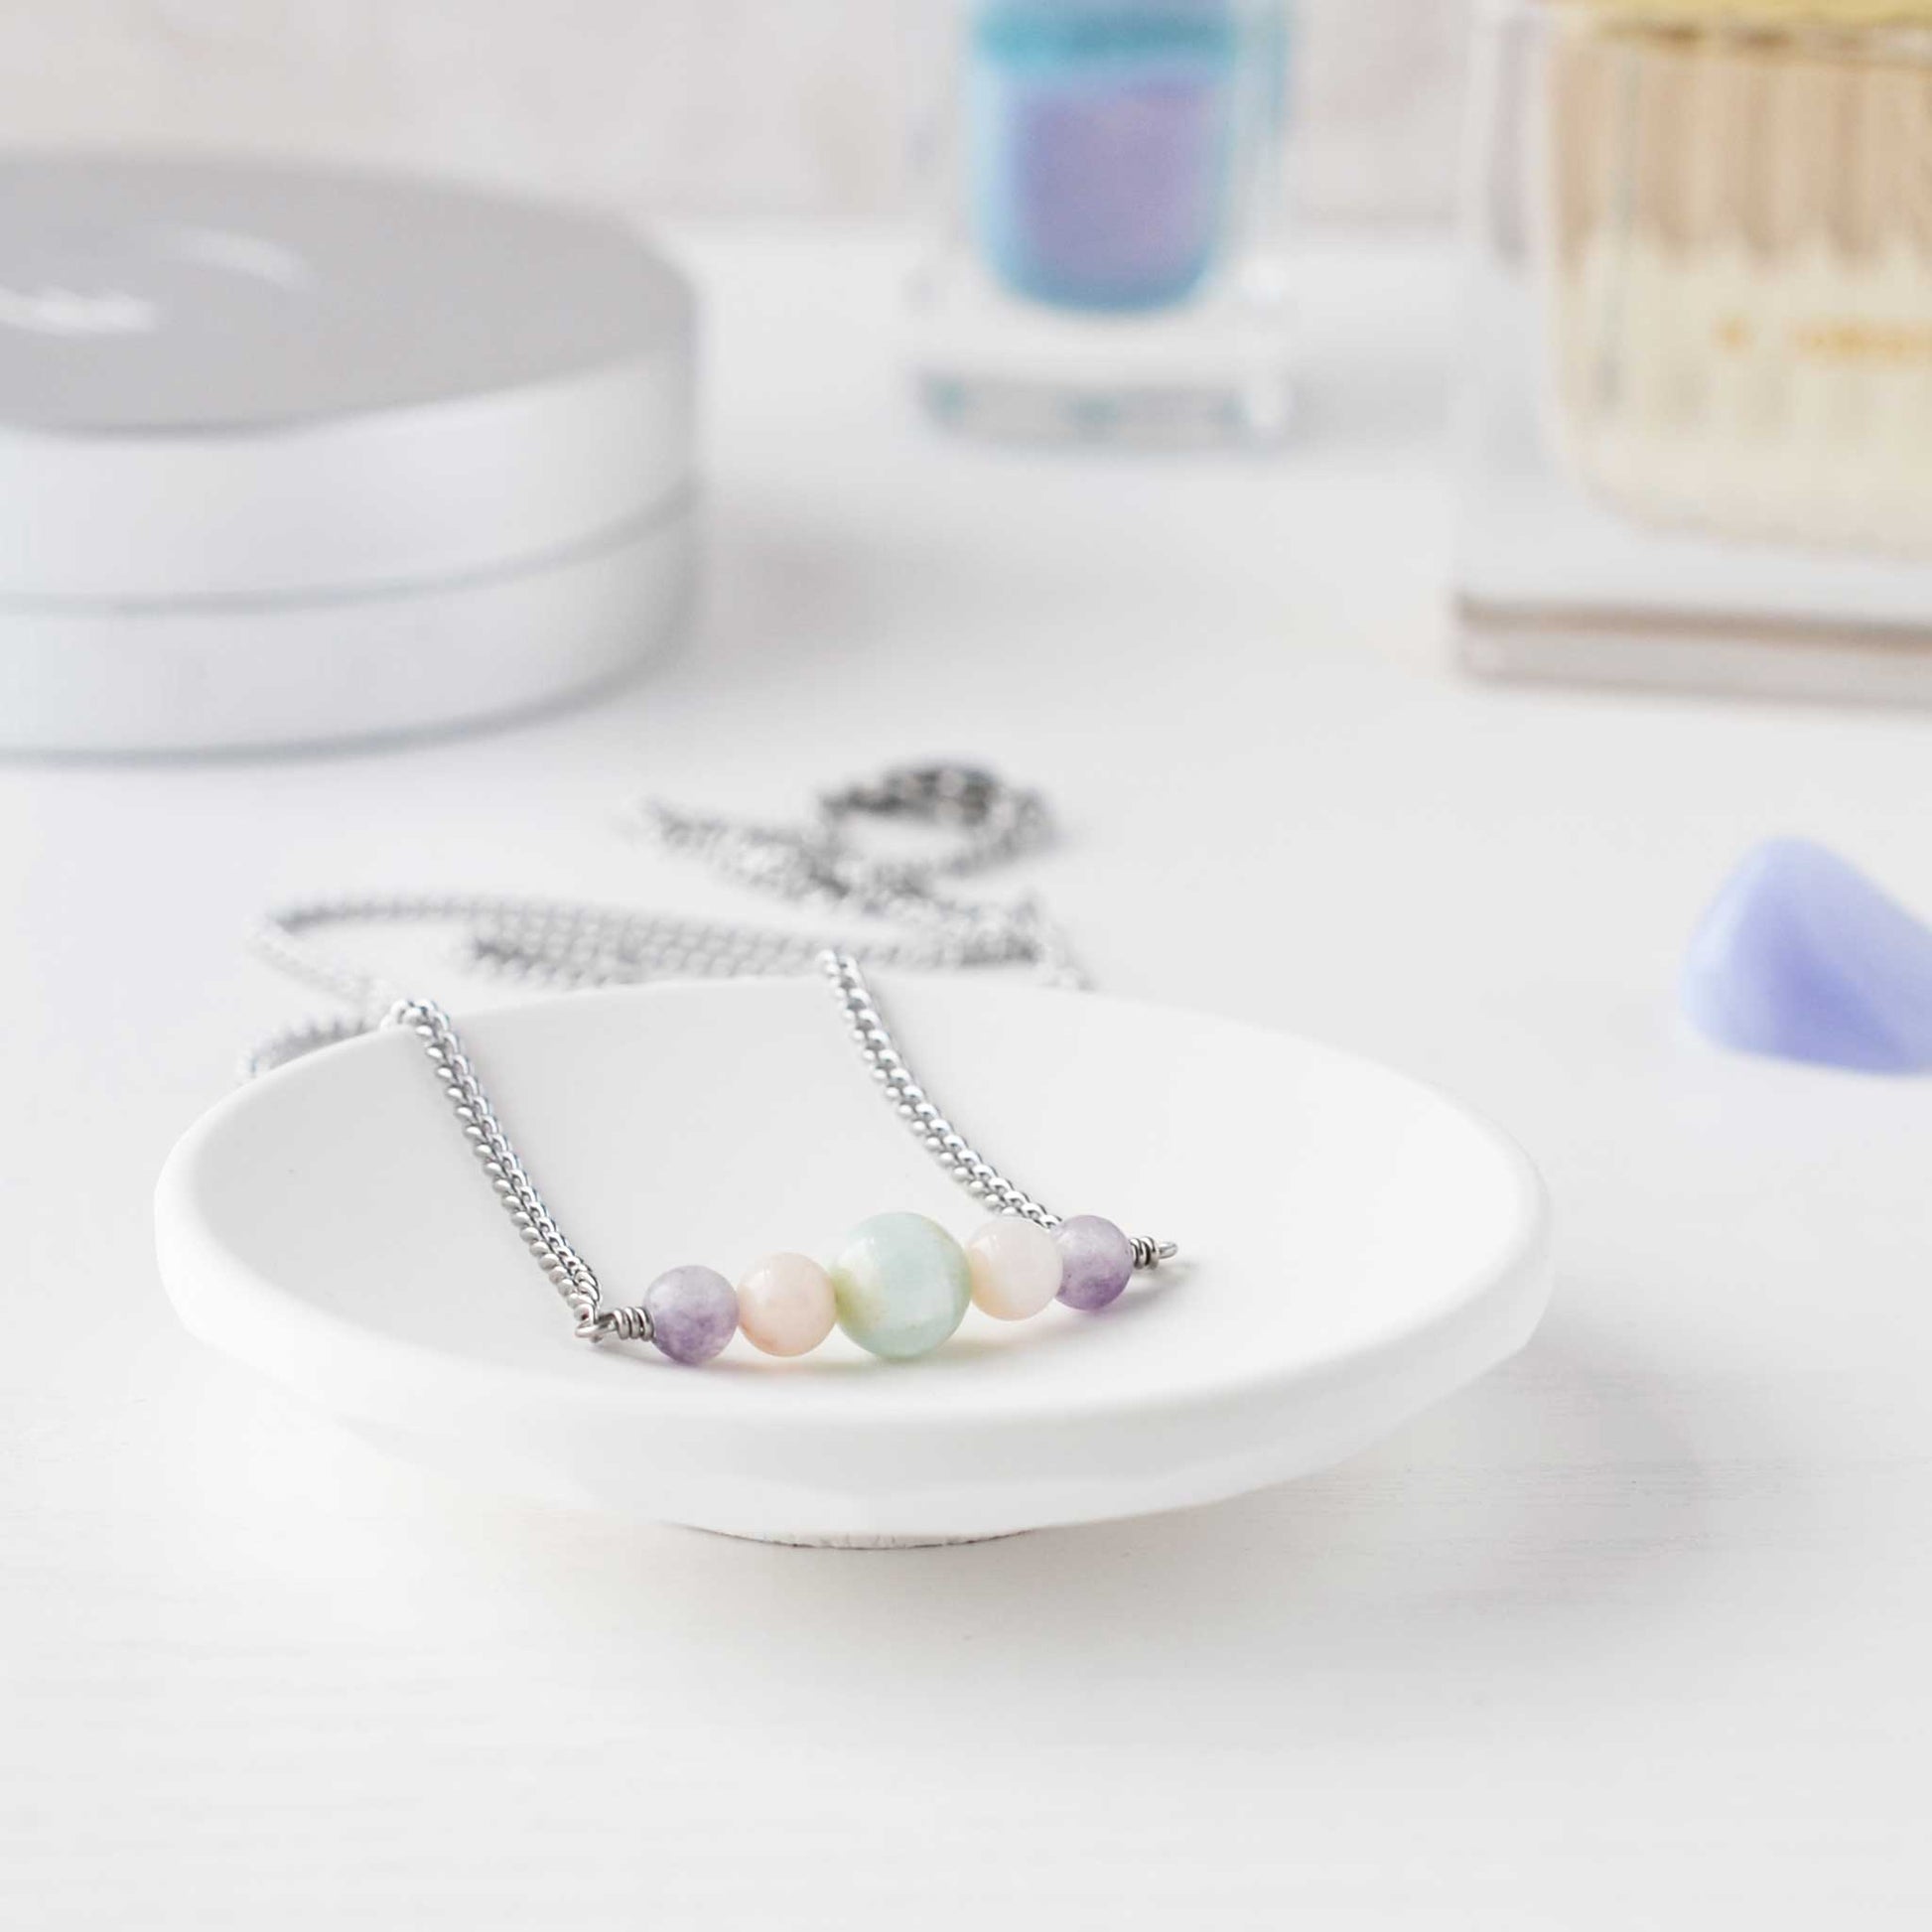 Pastel gemstone necklace in trinket dish on dressing table